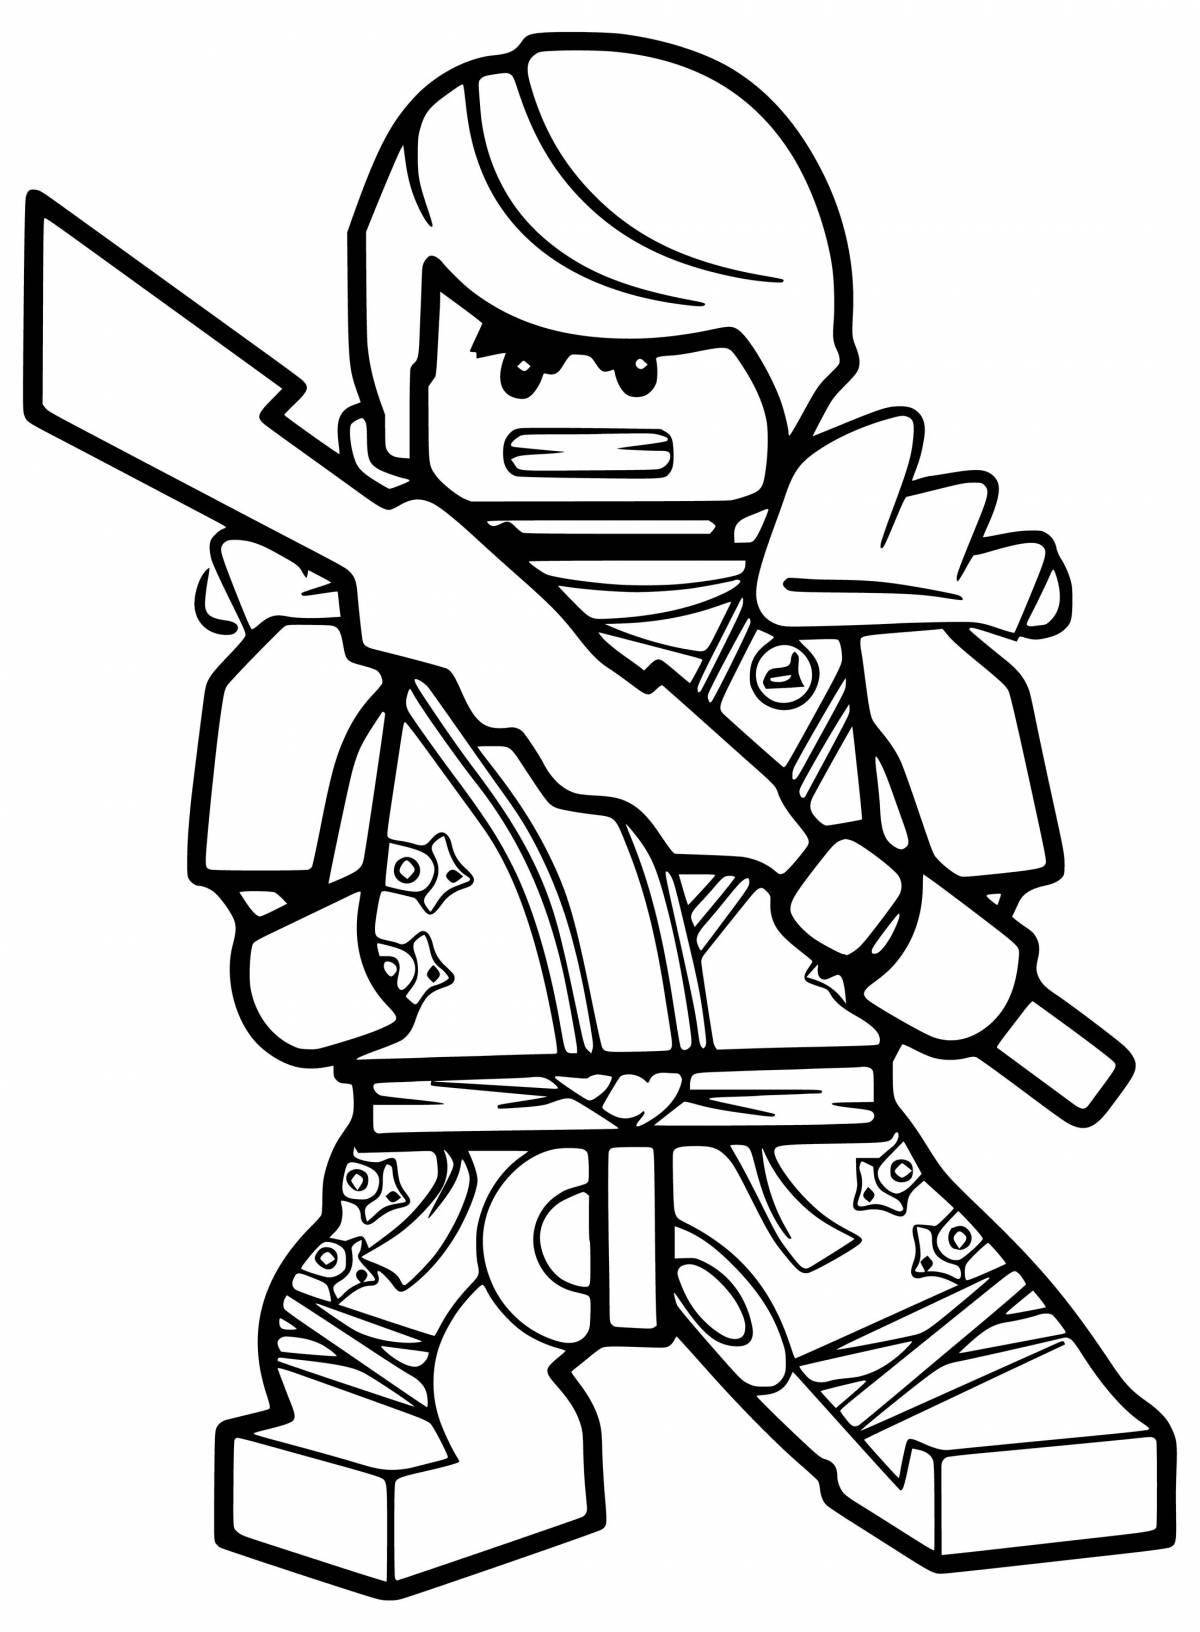 Mystic ninja coloring pages for kids